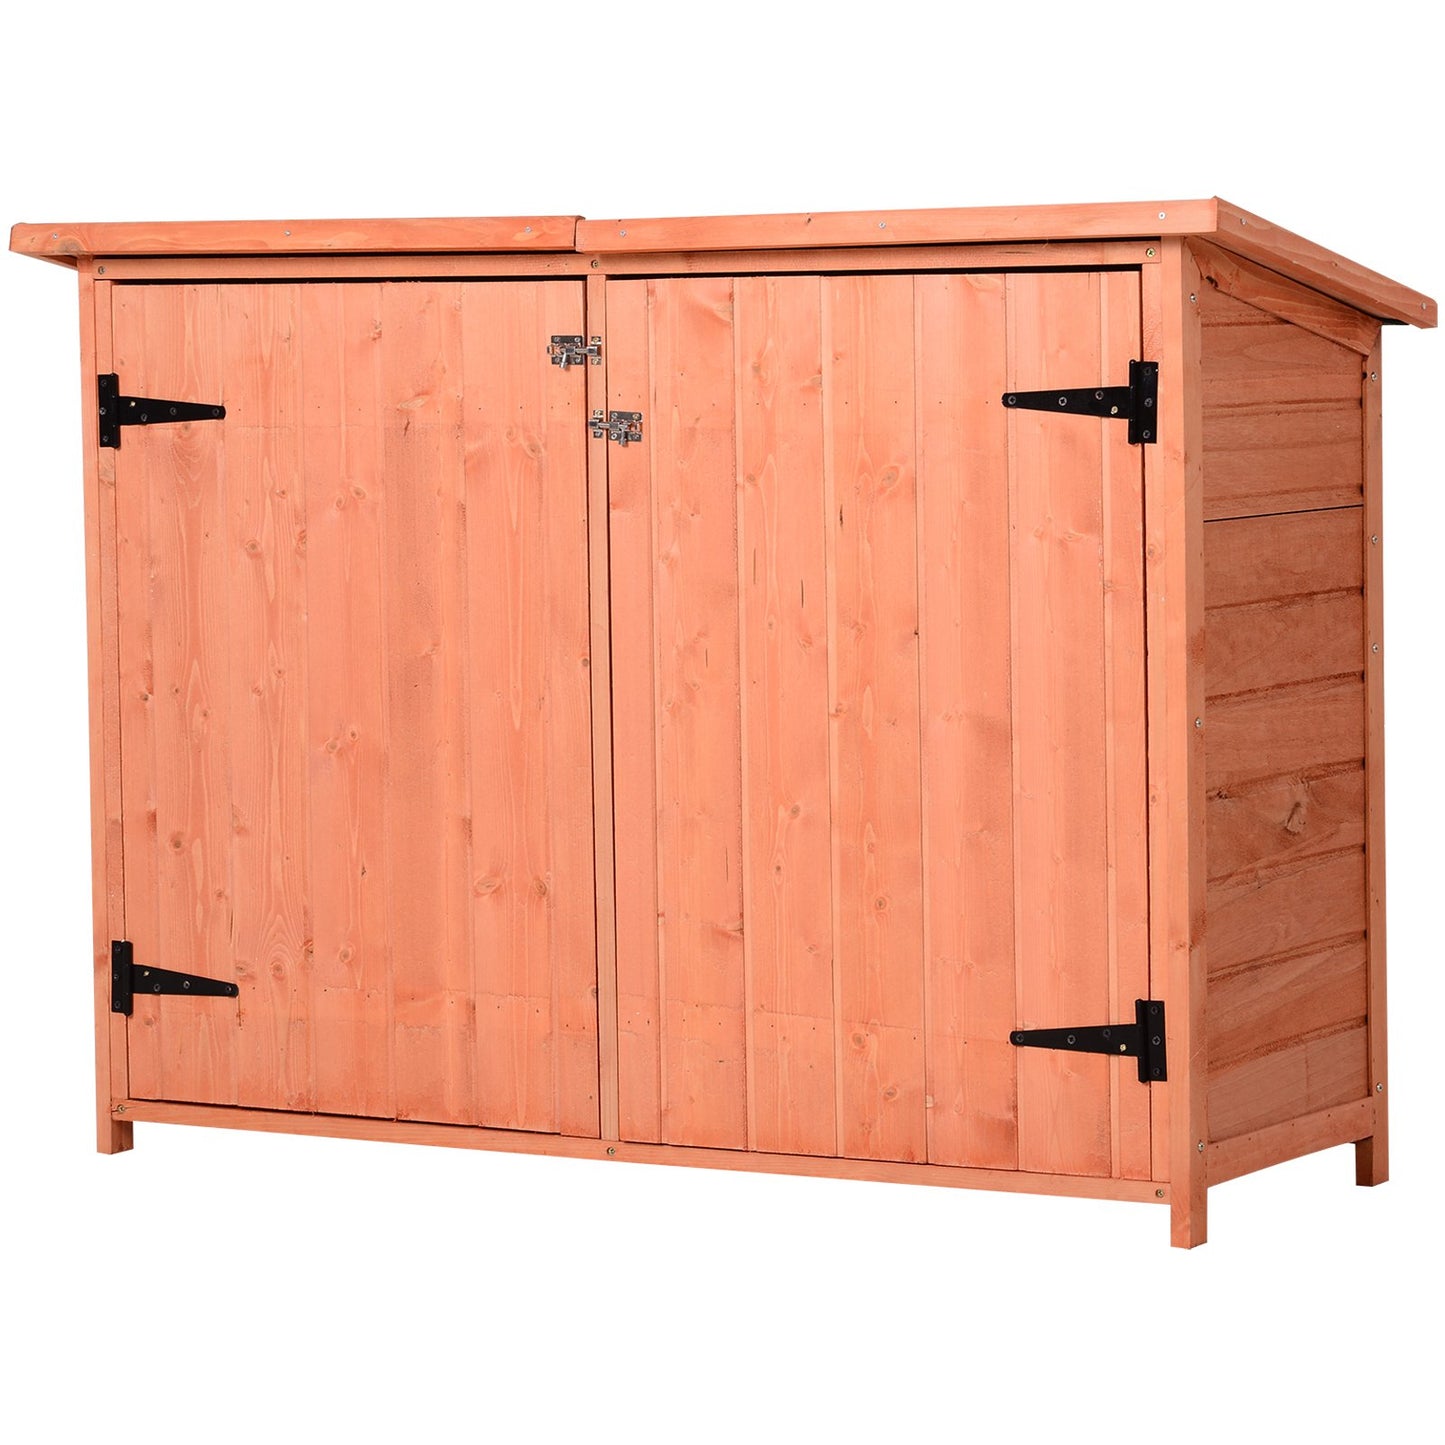 Outsunny 1.6 x 4.1ft Two Door Fir Wood Garden Storage Cabinet